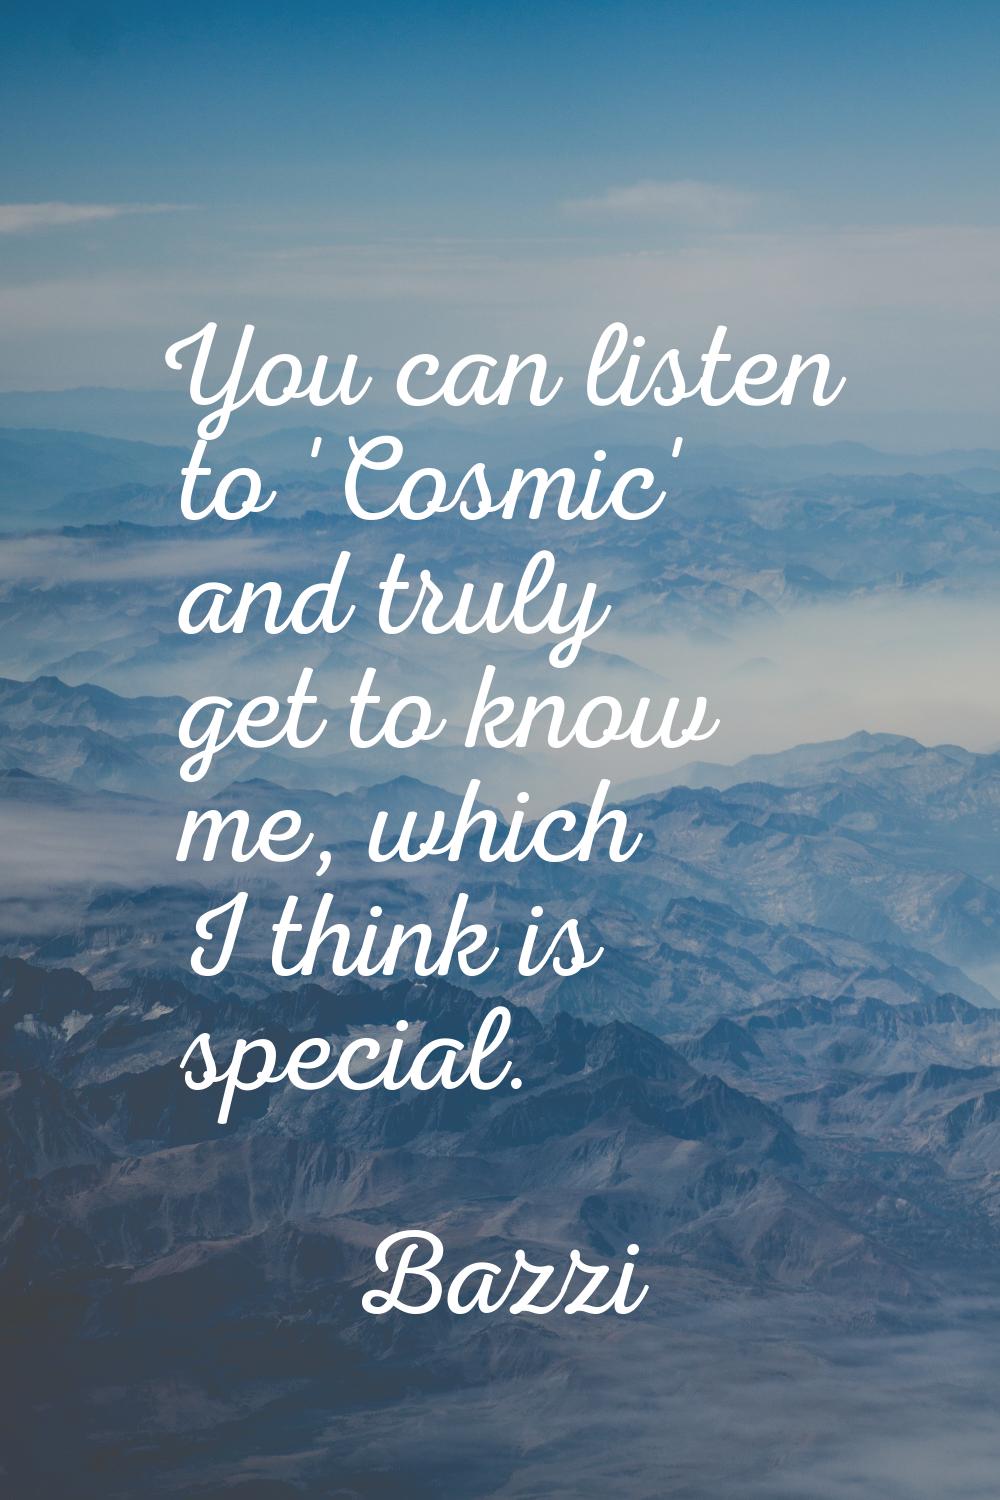 You can listen to 'Cosmic' and truly get to know me, which I think is special.